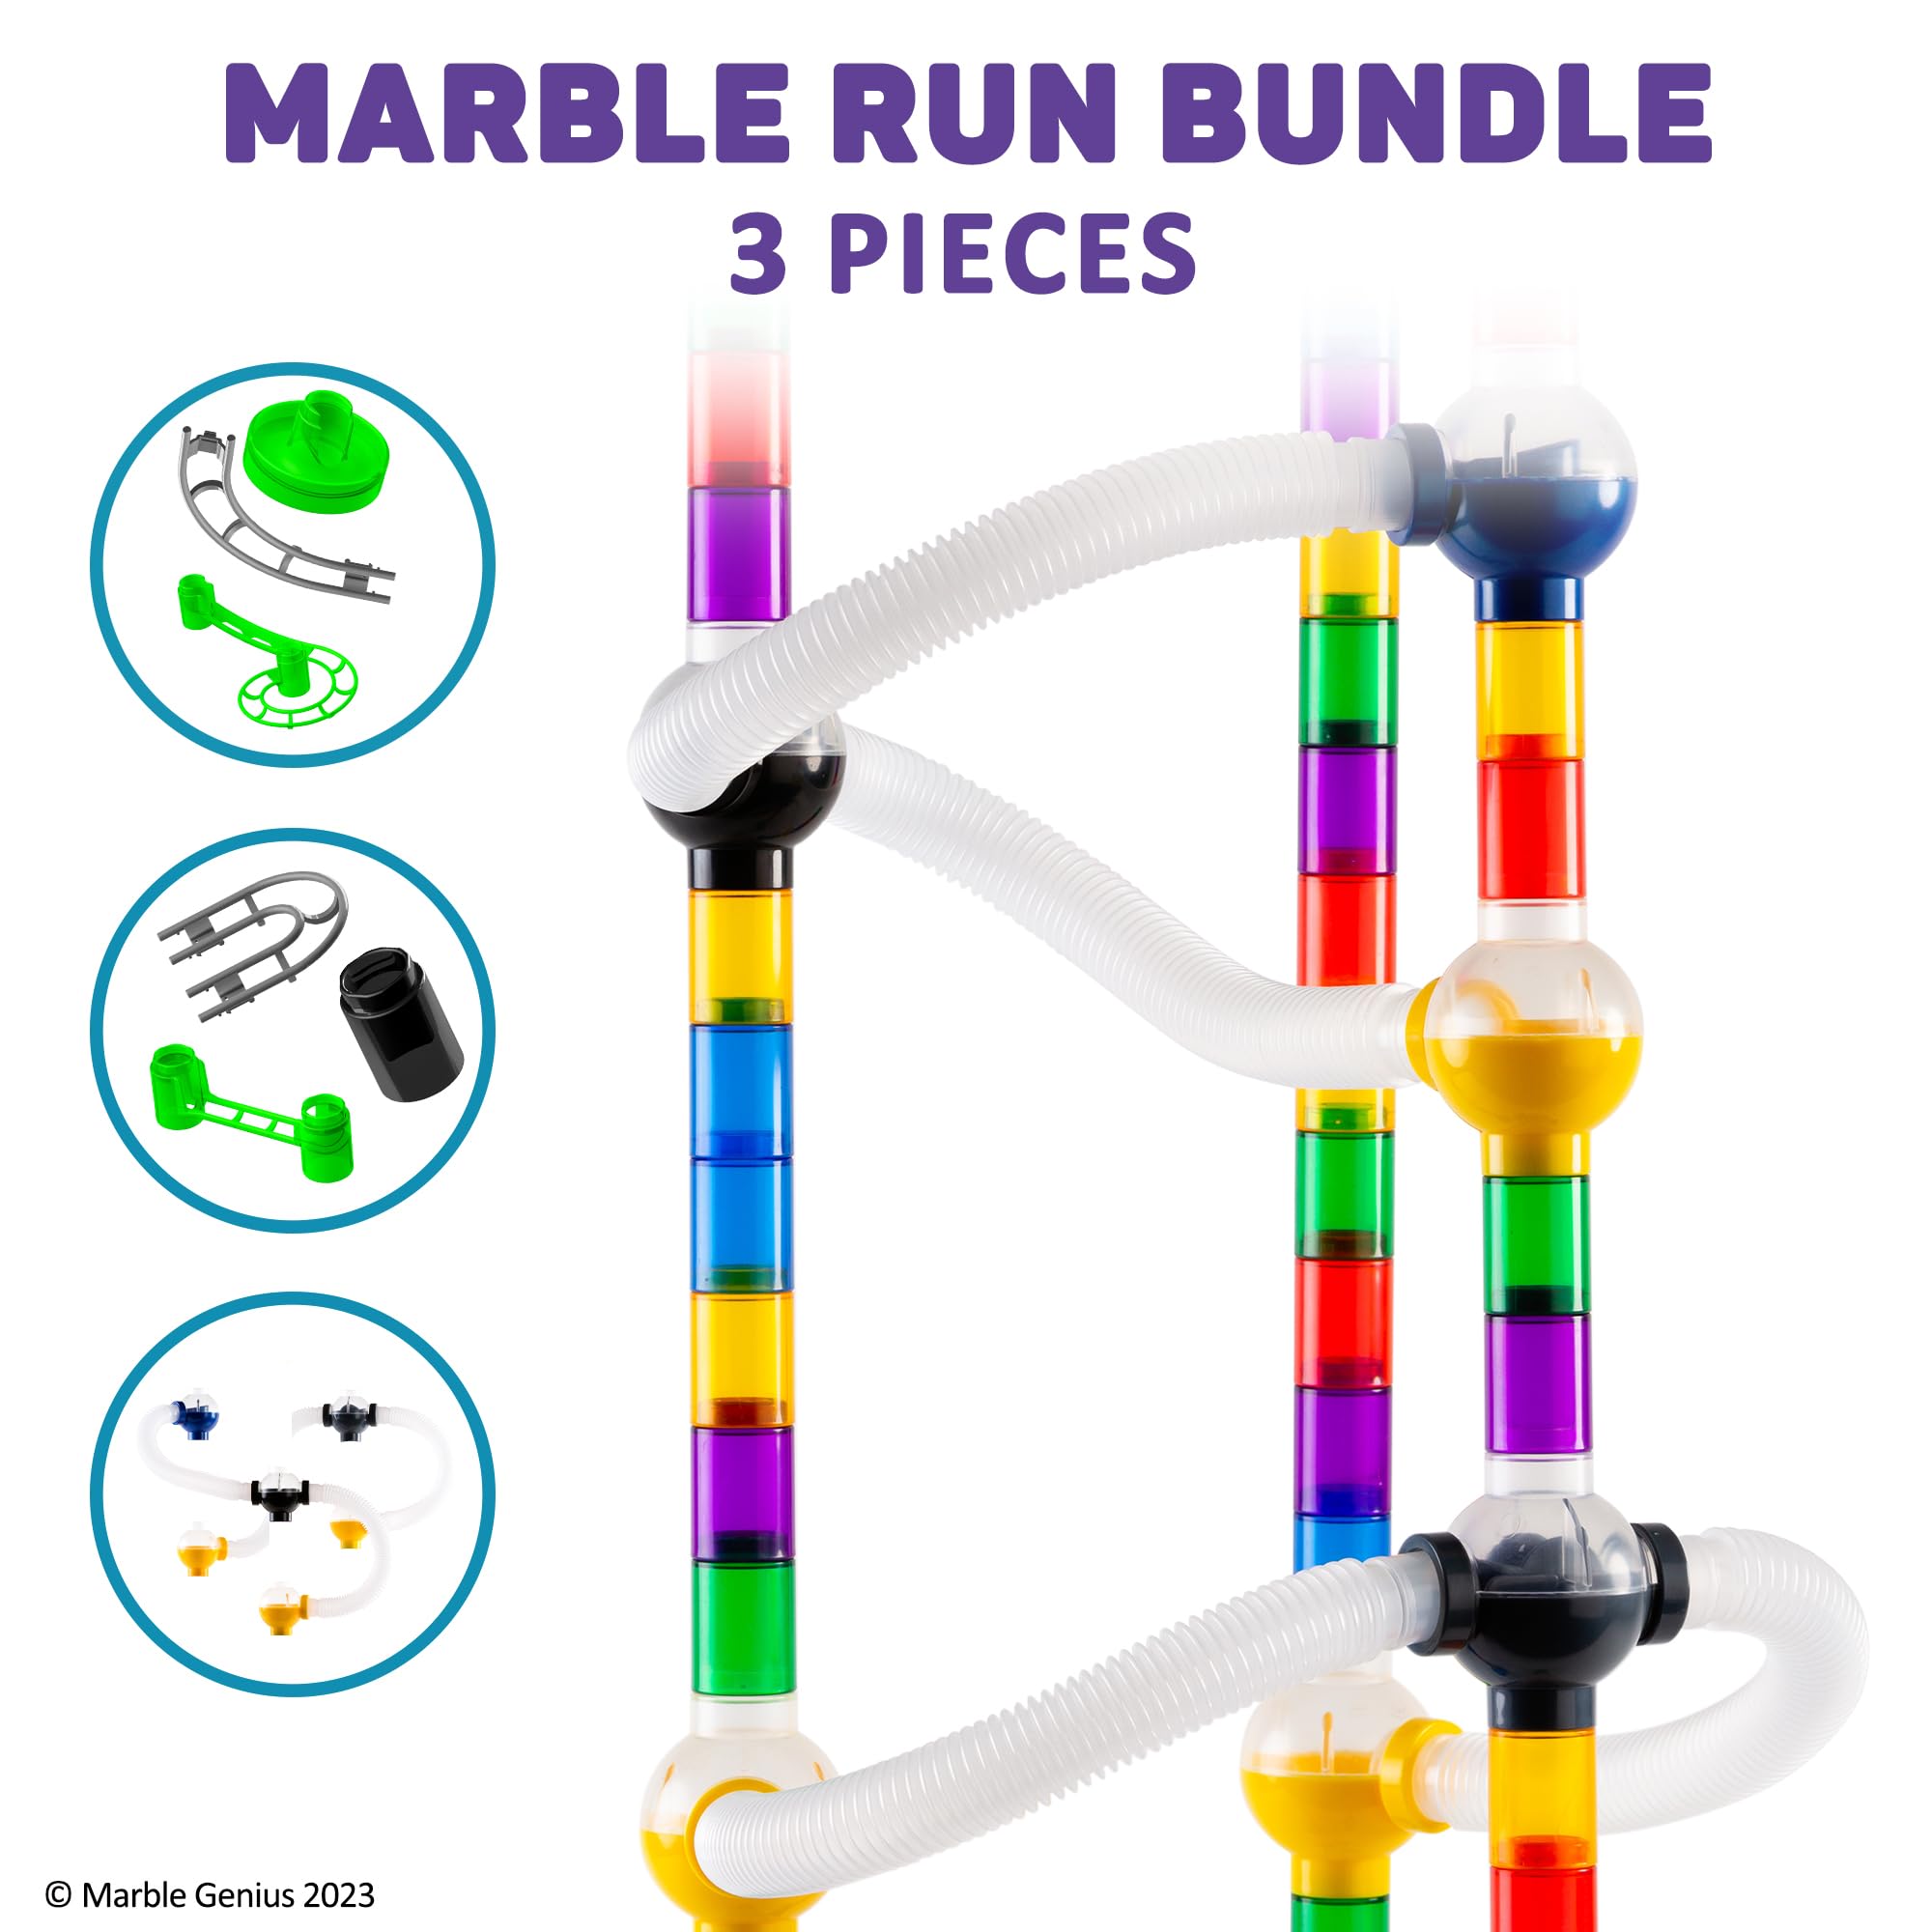 Marble Genius Bundle: Marble Rails Starter Set (200 Pieces), Pipes & Spheres Accessory (10 Pieces), Marble Rails Automatic Chain Lift, with Online App and Full-Color Instructions